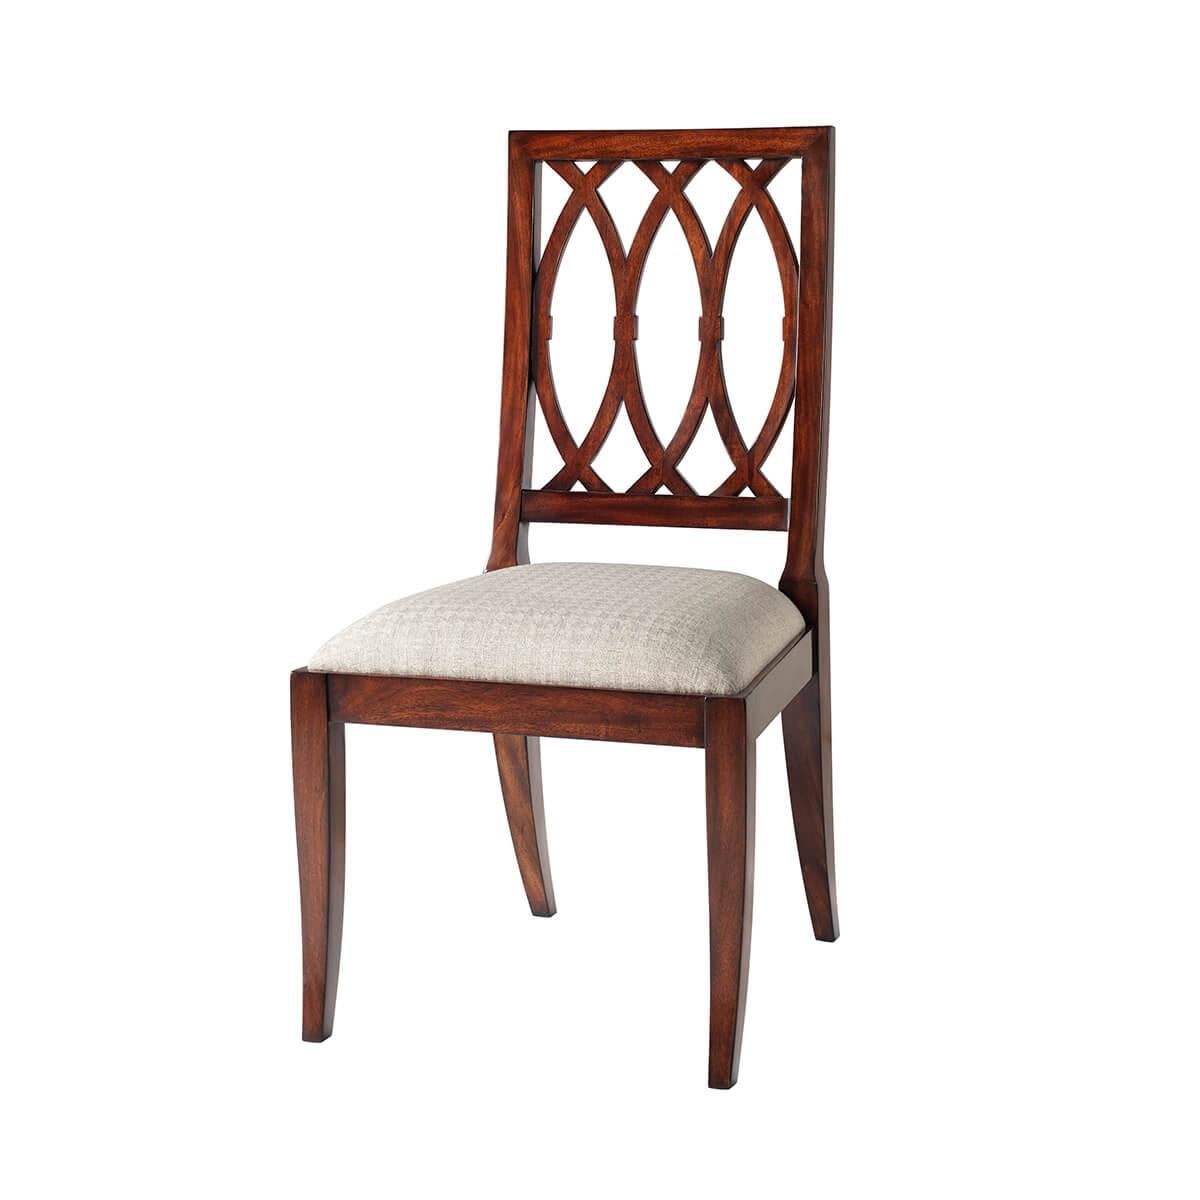 A mahogany lattice back dining chair, the rectangular back enclosing a lattice of interlacing C's above an upholstered drop-in seat, on square tapering legs. Inspired by an Empire original.

Dimensions: 21